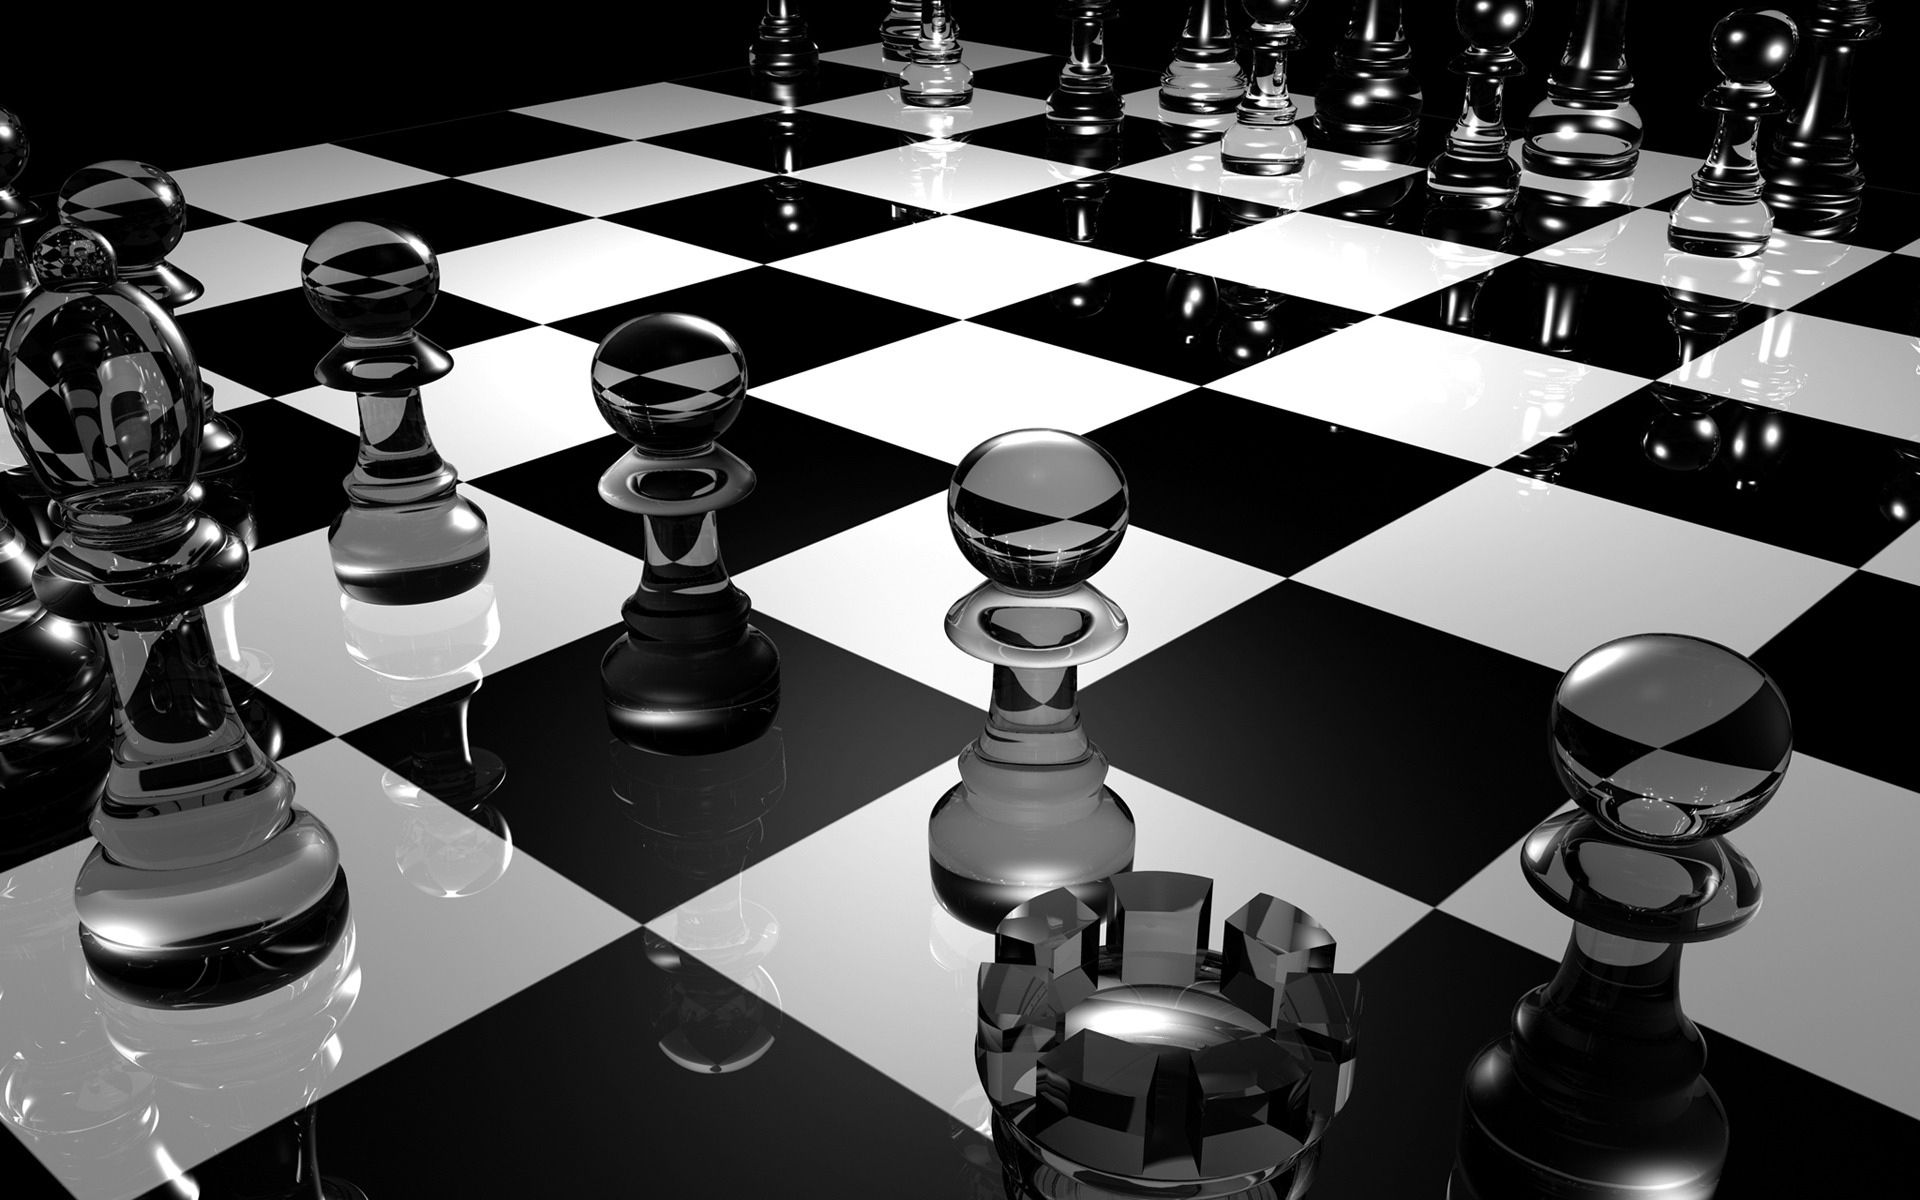 82876 download wallpaper 3d, chess, surface, glass, bw, chb, board screensavers and pictures for free